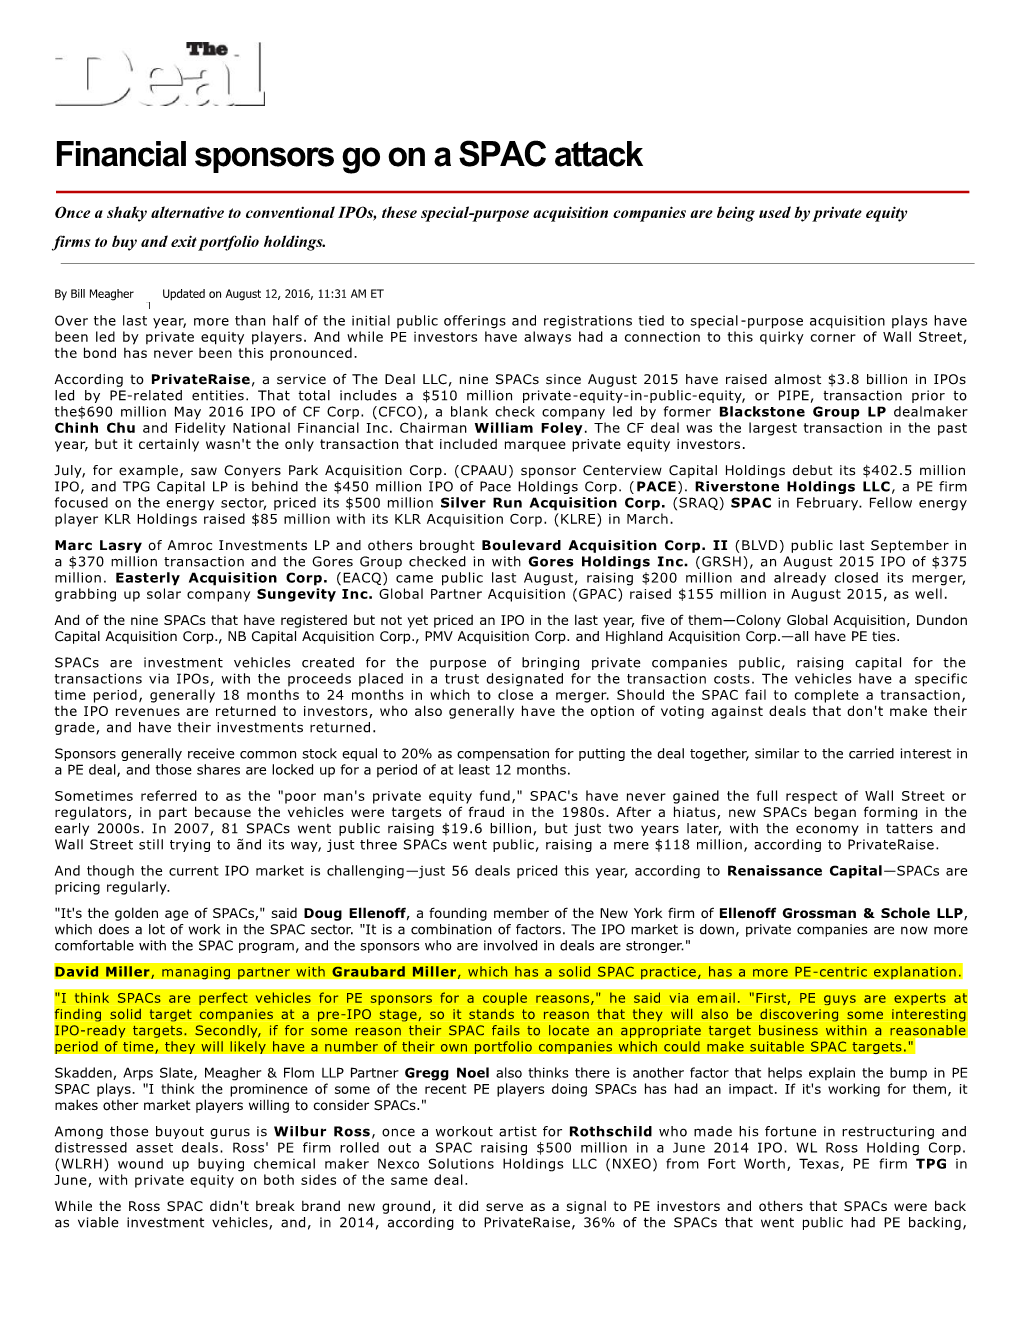 Financial Sponsors Go on a SPAC Attack